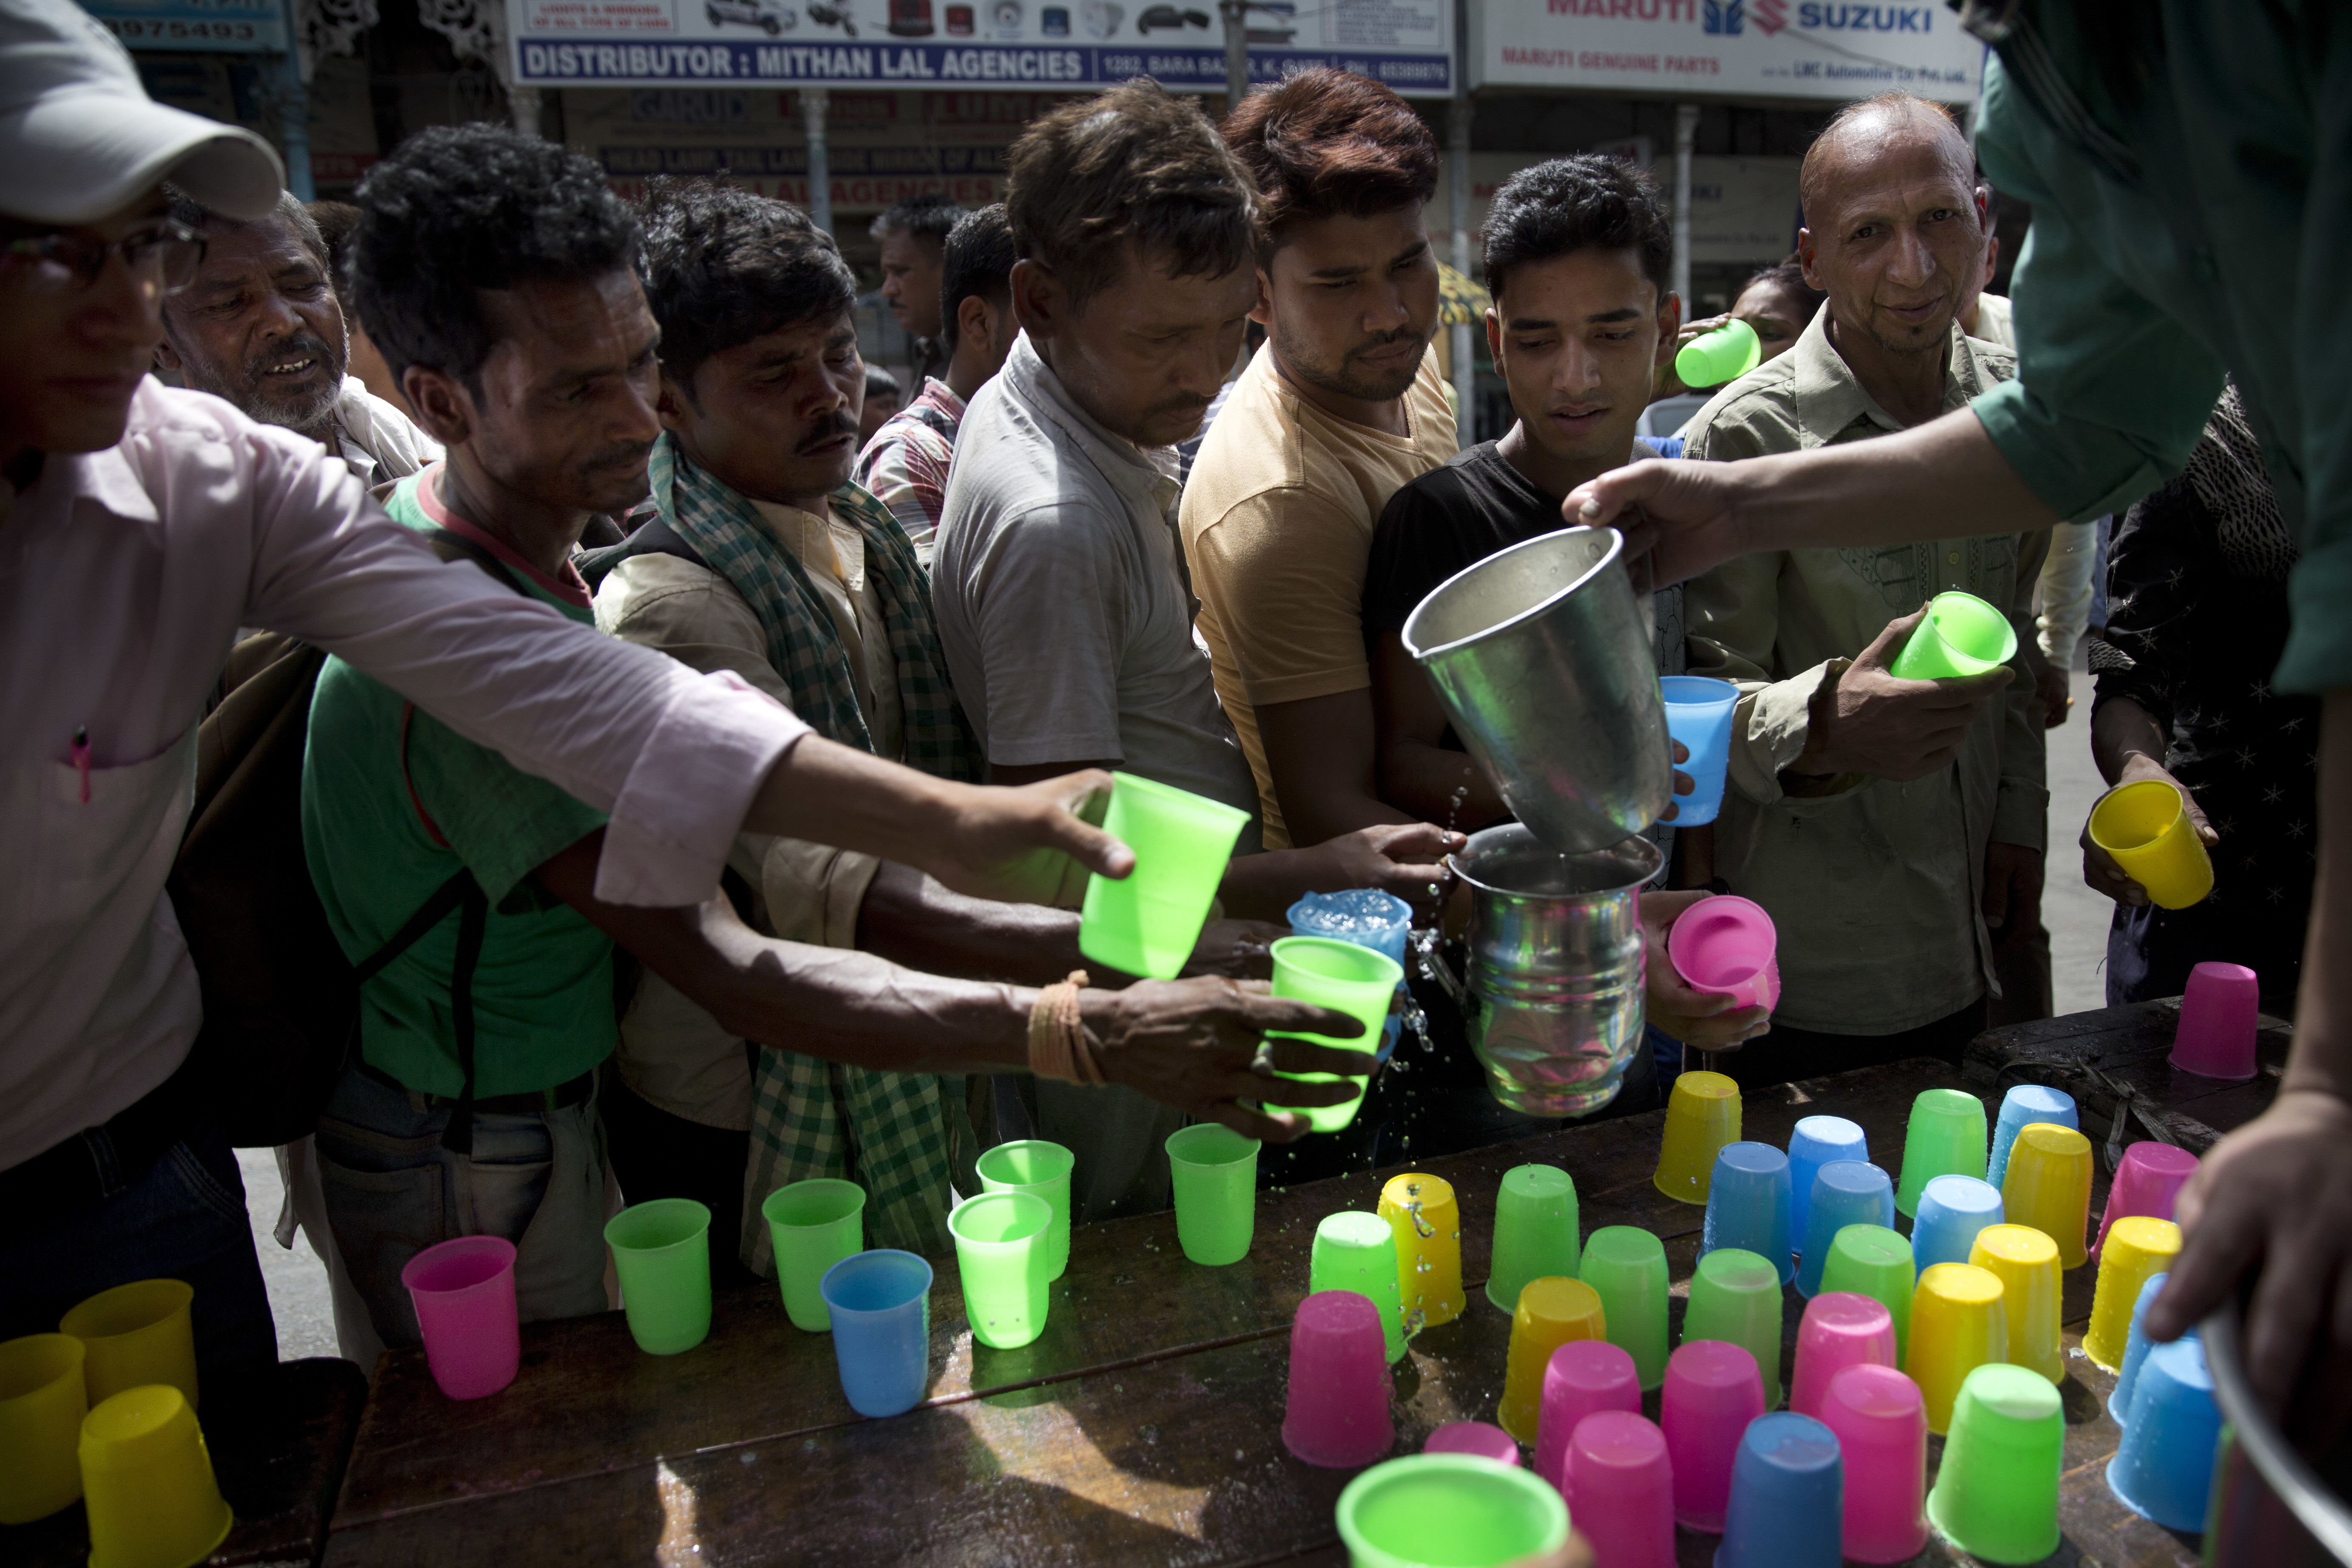 Indians stand in line to get cold drink being freely distributed by a roadside on hot summer day in New Delhi, India, Monday, June 5, 2017. Most parts of northern India is reeling under intense heat wave conditions with the temperature crossing over 43 degrees Celsius (109.4 Fahrenheit).(AP Photo/Tsering Topgyal)